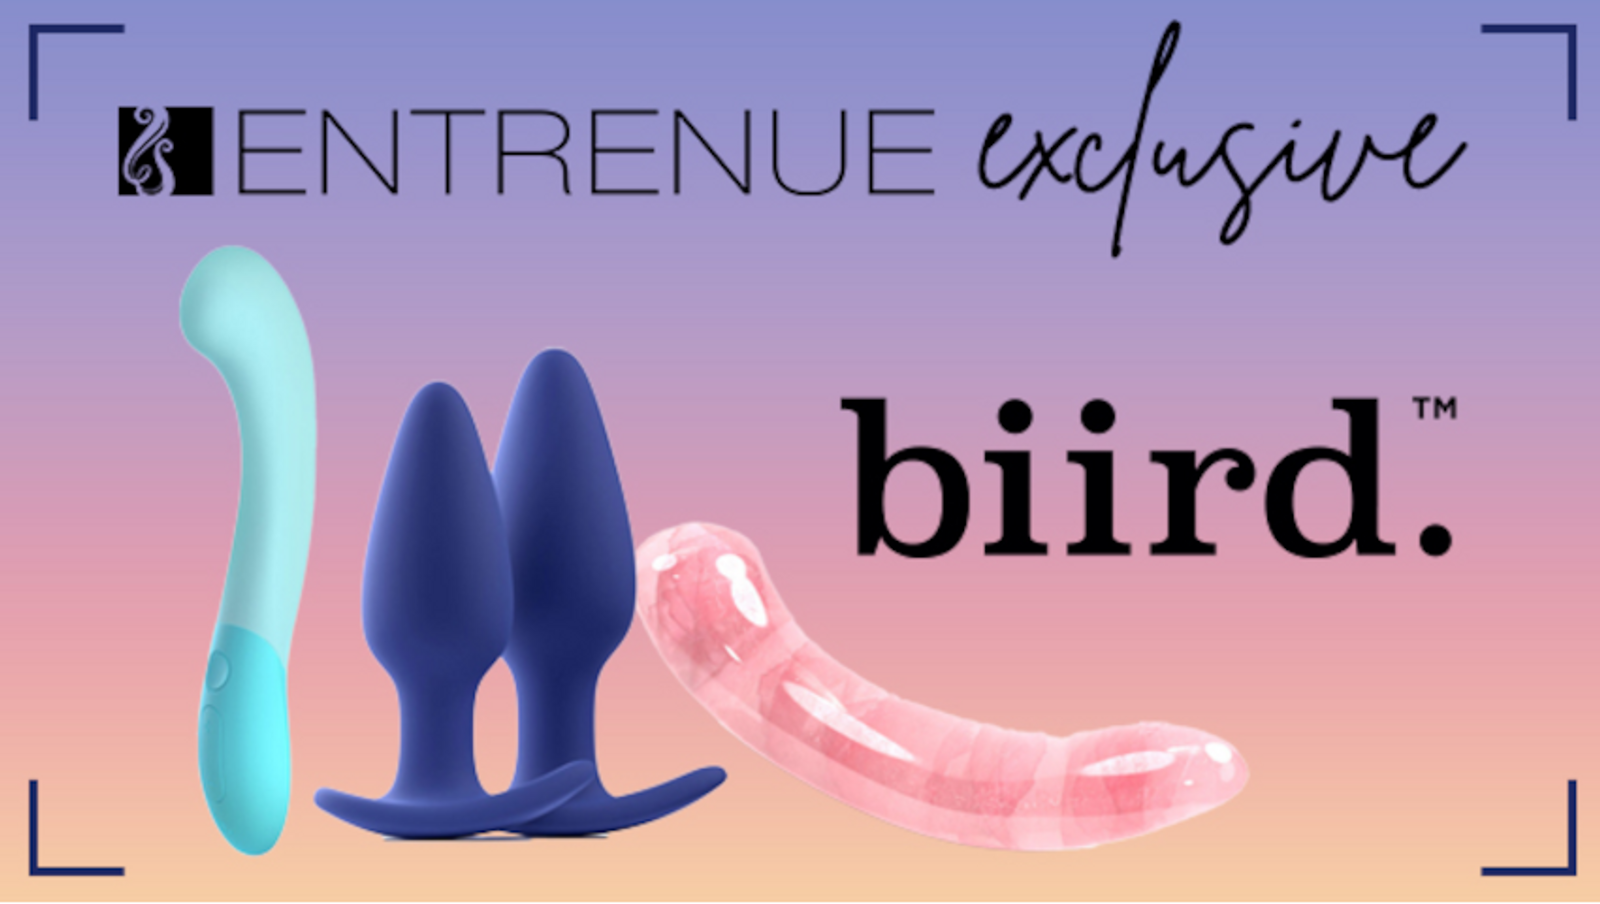 Entrenue Announces US Distribution of Biird Elements Collection